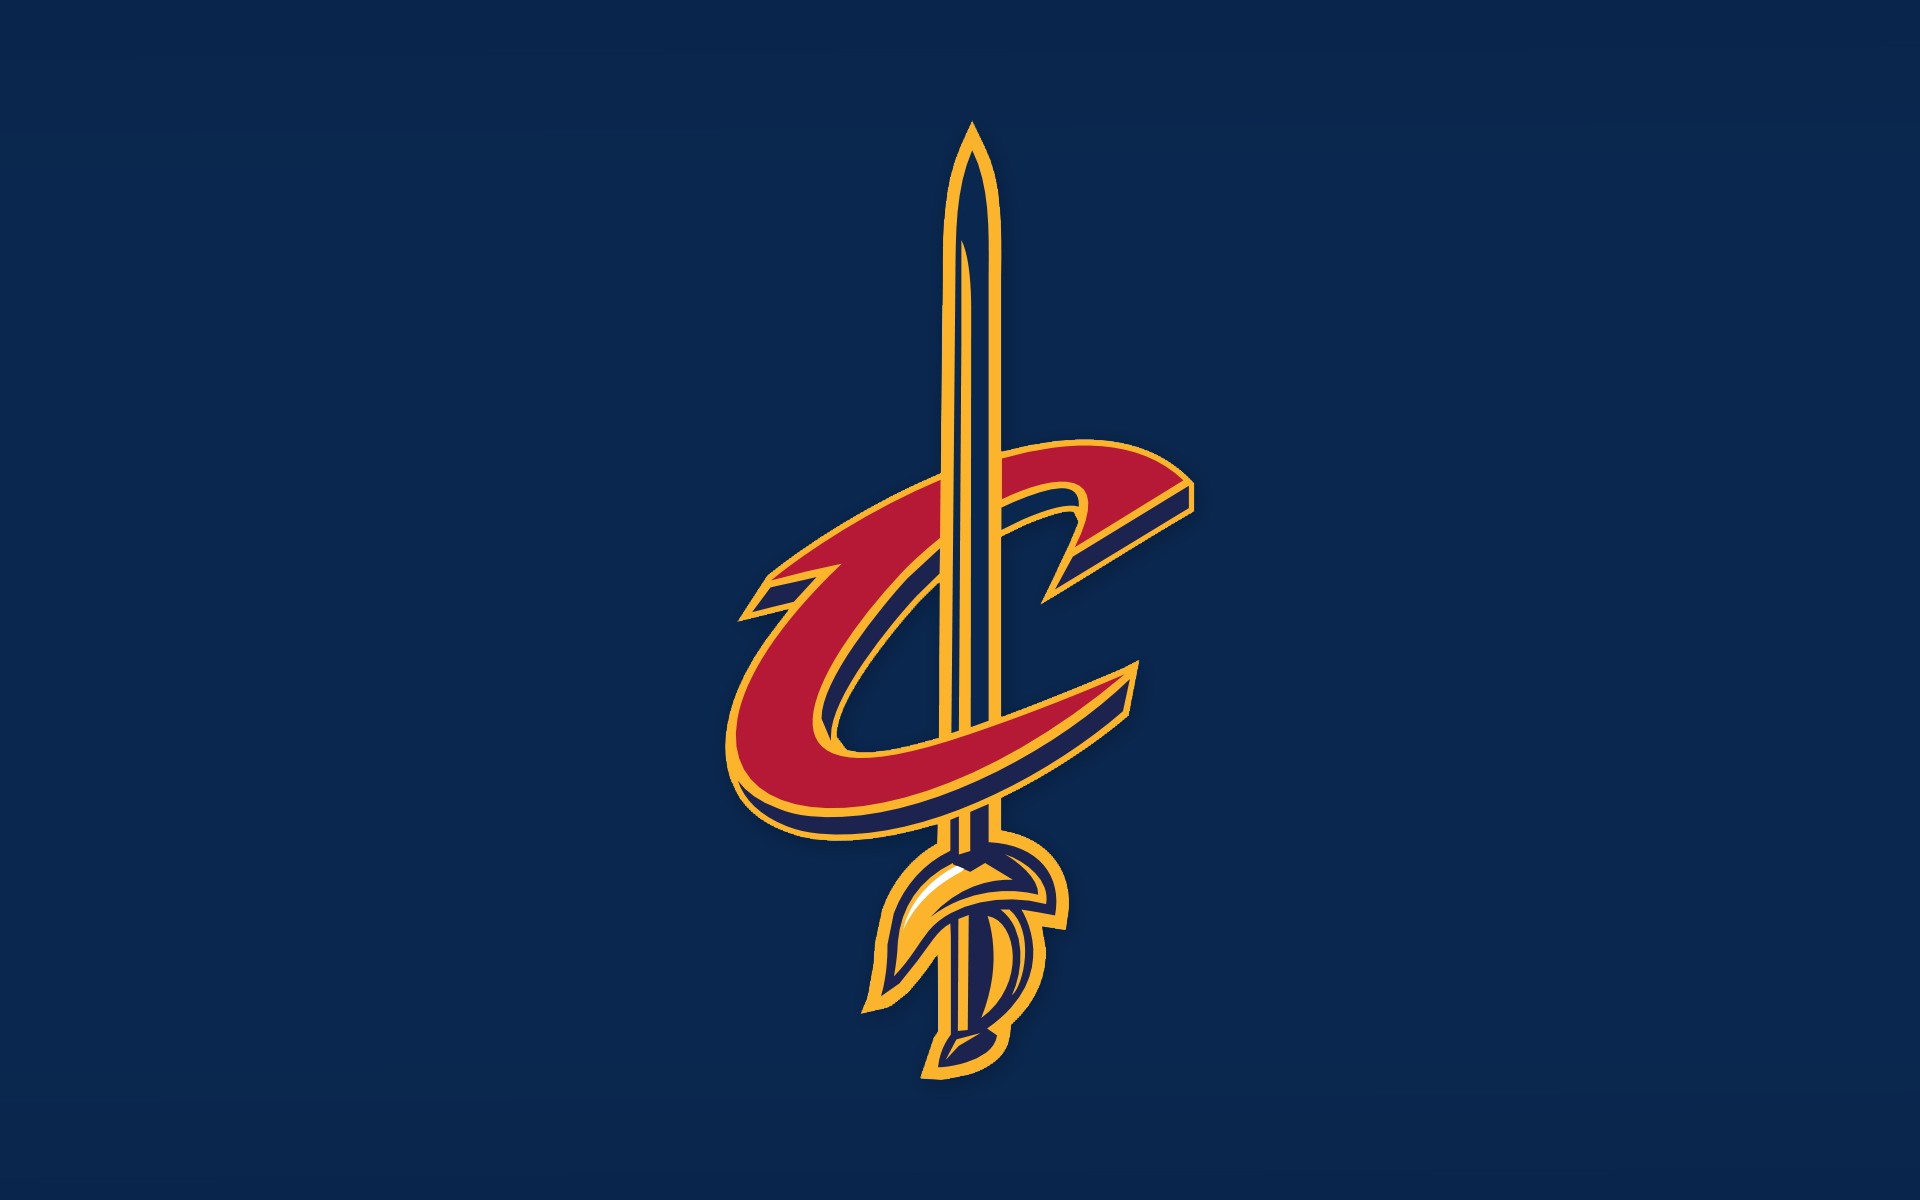 Cleveland Cavaliers Logo Wallpaper Free Download*1200 Download Transparent Background Cleveland Cavaliers